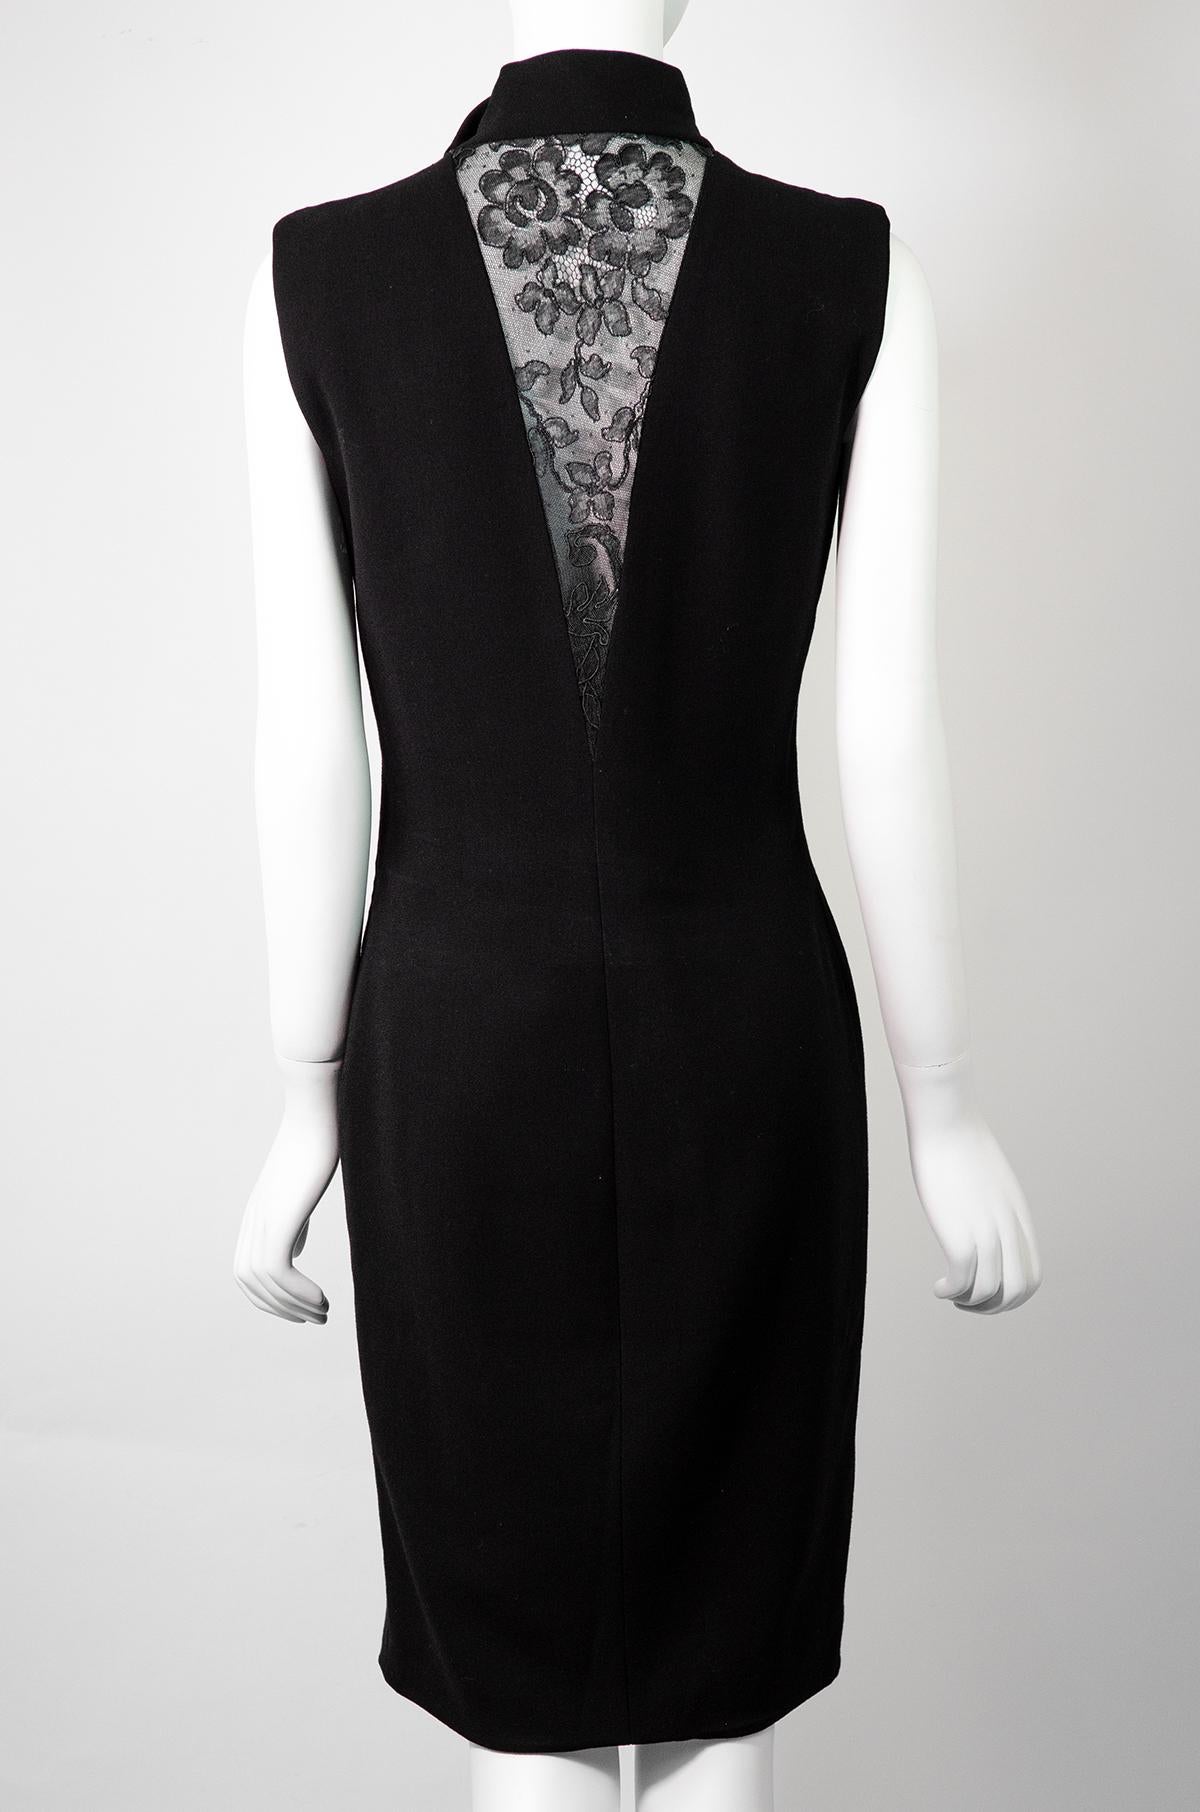 VERSACE F/W 1993 Vintage Lace Detail Black Dress by Gianni Versace In Excellent Condition For Sale In Berlin, BE